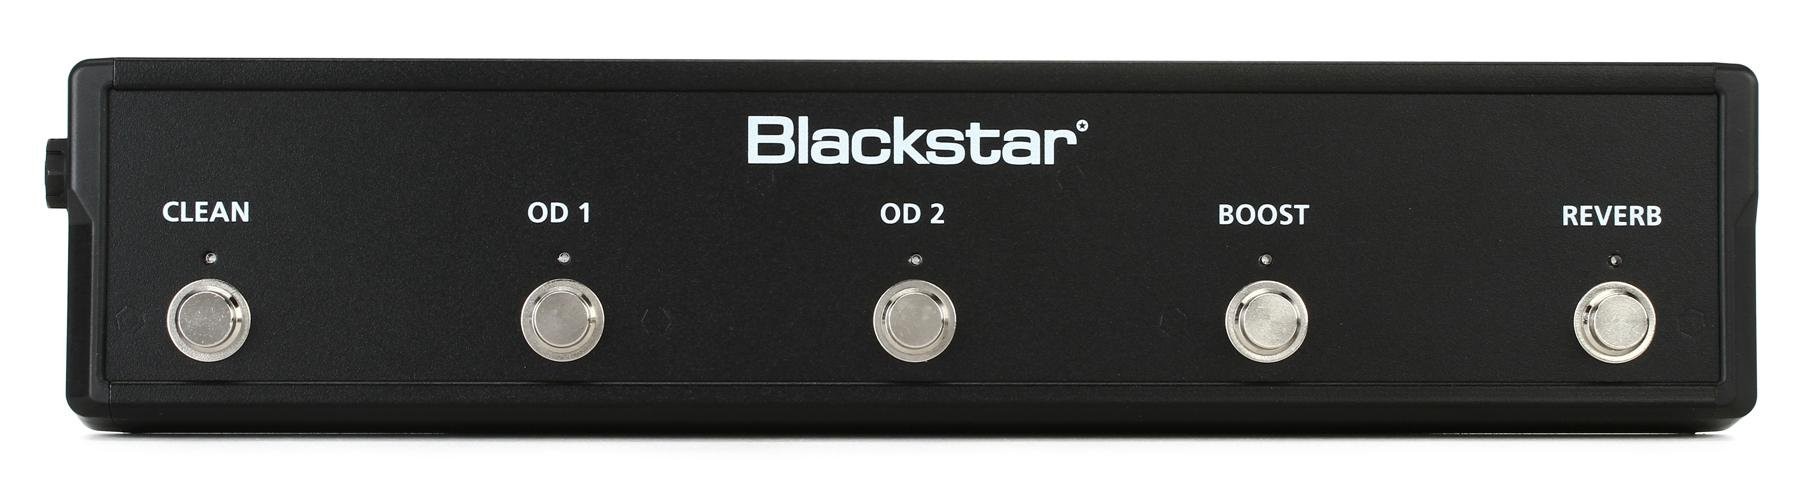 Blackstar HT FS 14 Footswitch for Venue MkII image 1